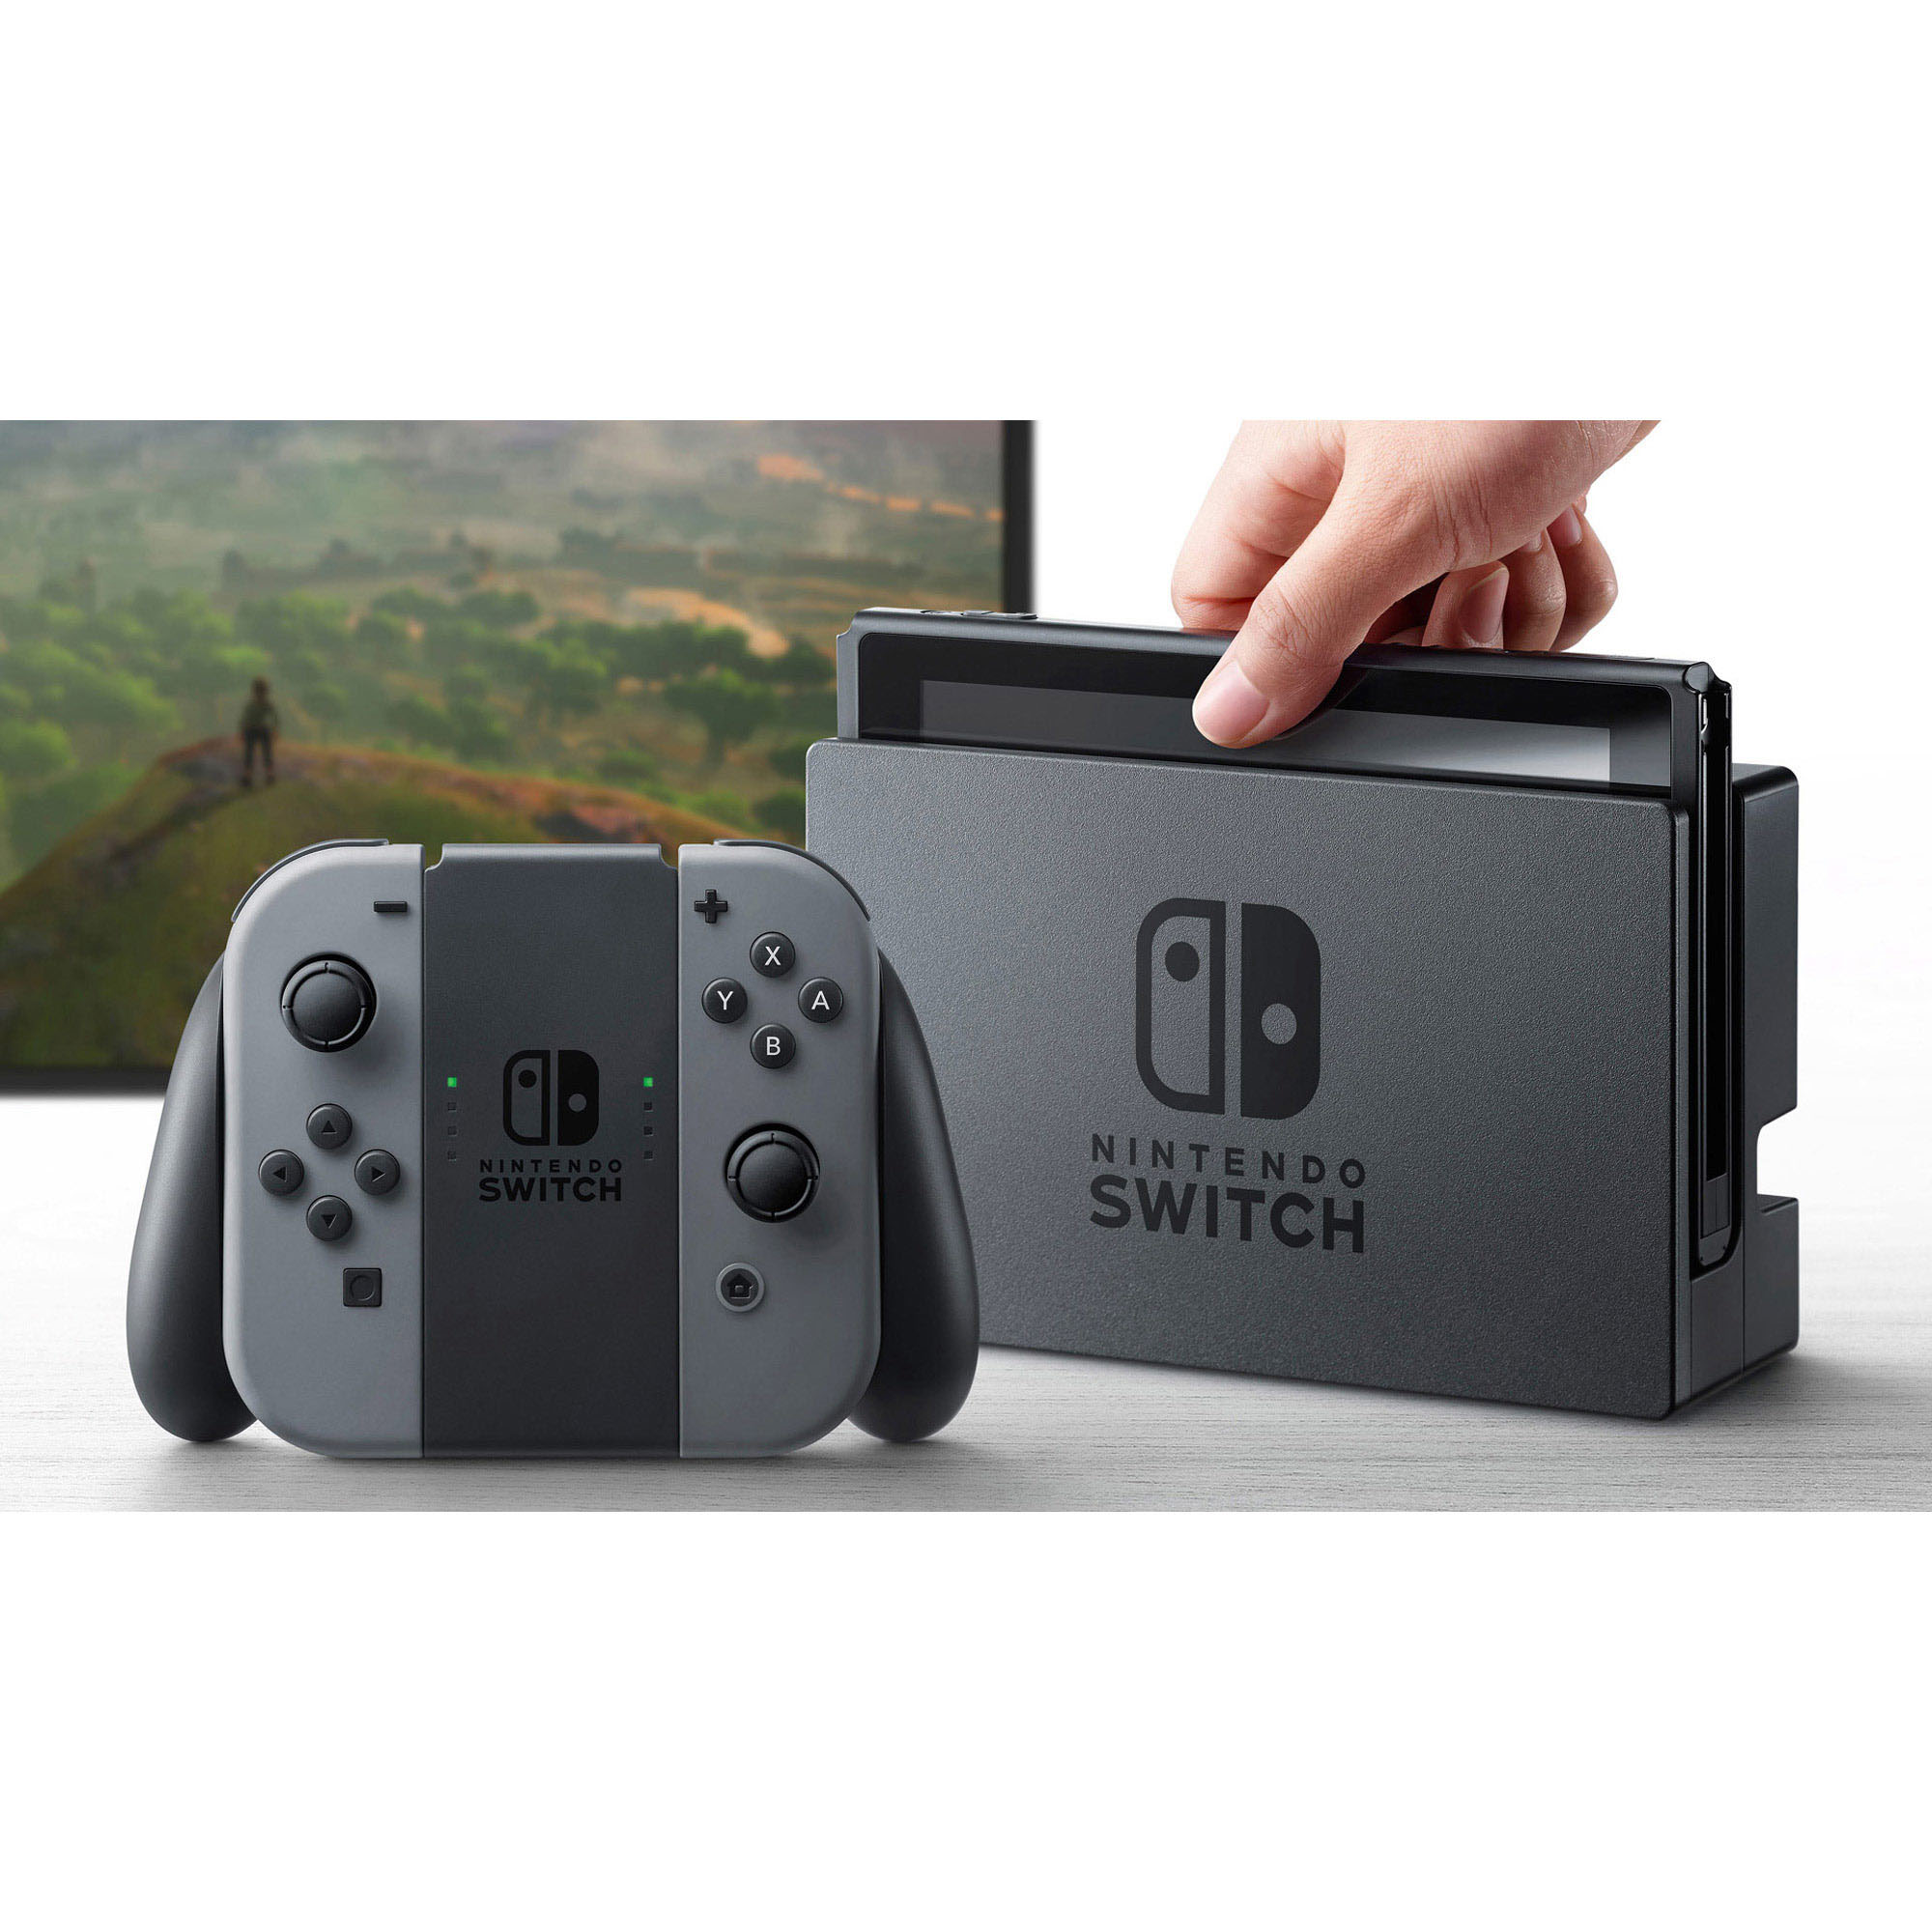 where can i buy a nintendo switch near me